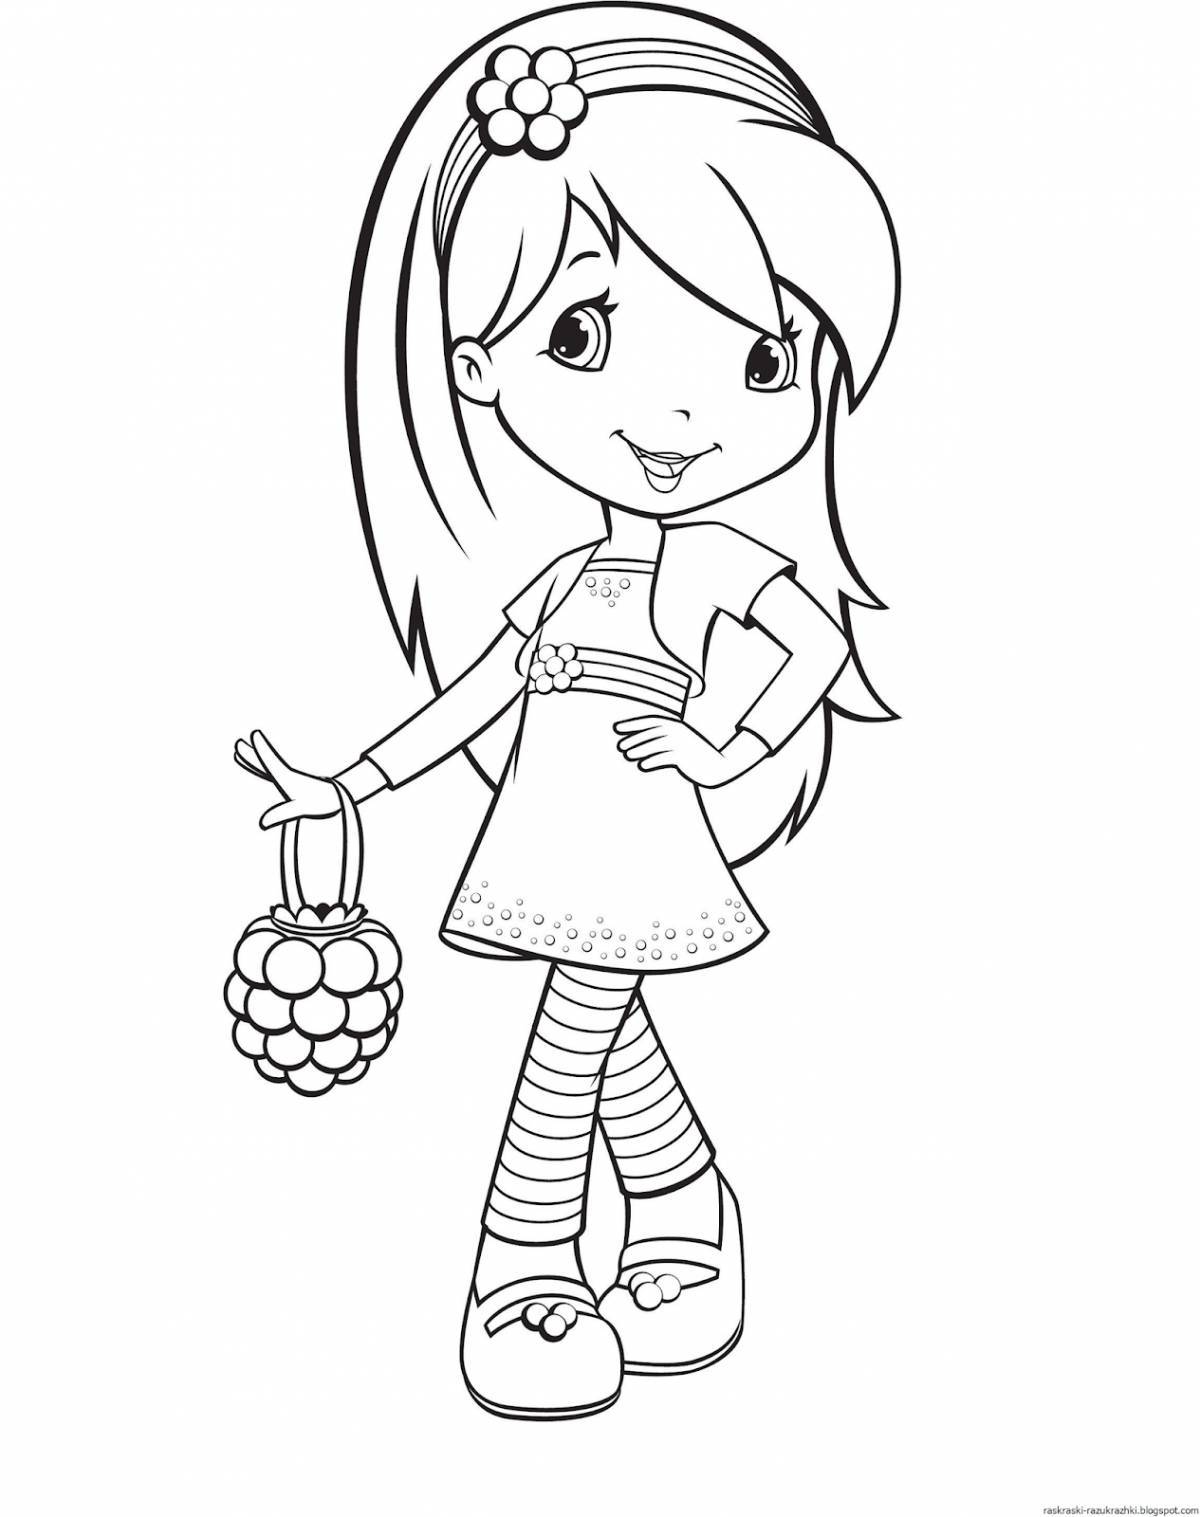 Creative coloring page turn it on